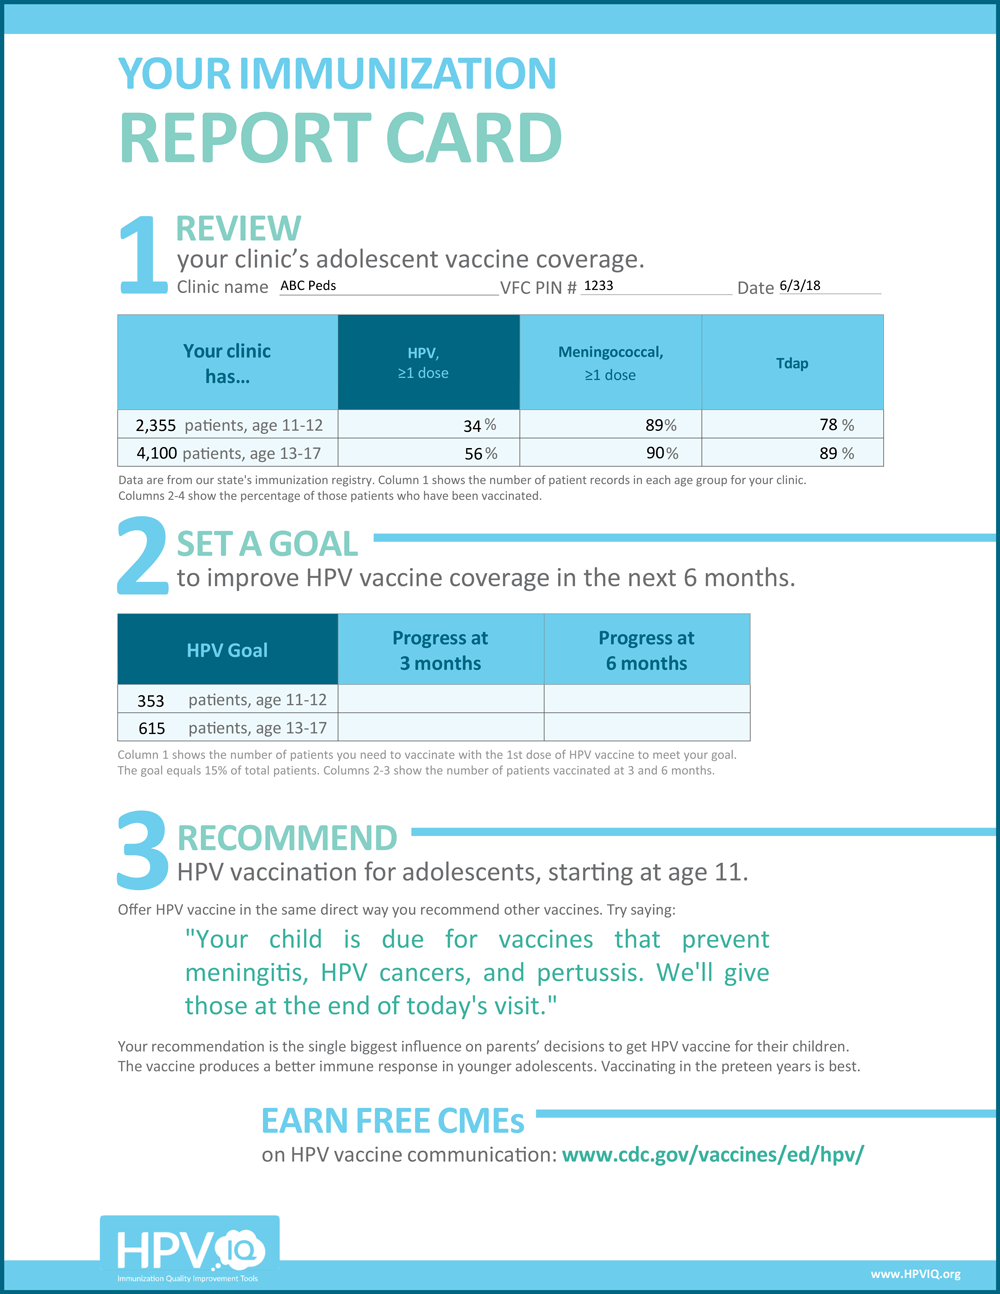 A blurred immunization report card template is shown with 3 clear sections. The first section is for indicating data on the number and percentage of adolescents in the clinic who are vaccinated for HPV, as compared with 2 other adolescent vaccines. The second is to help set a goal to improve HPV coverage and indicate progress at 3 and 6 months. The third is a recommendation to parents to have their child vaccinated, starting at age 11 years. The words earn free CMEs compose the heading of the last message.